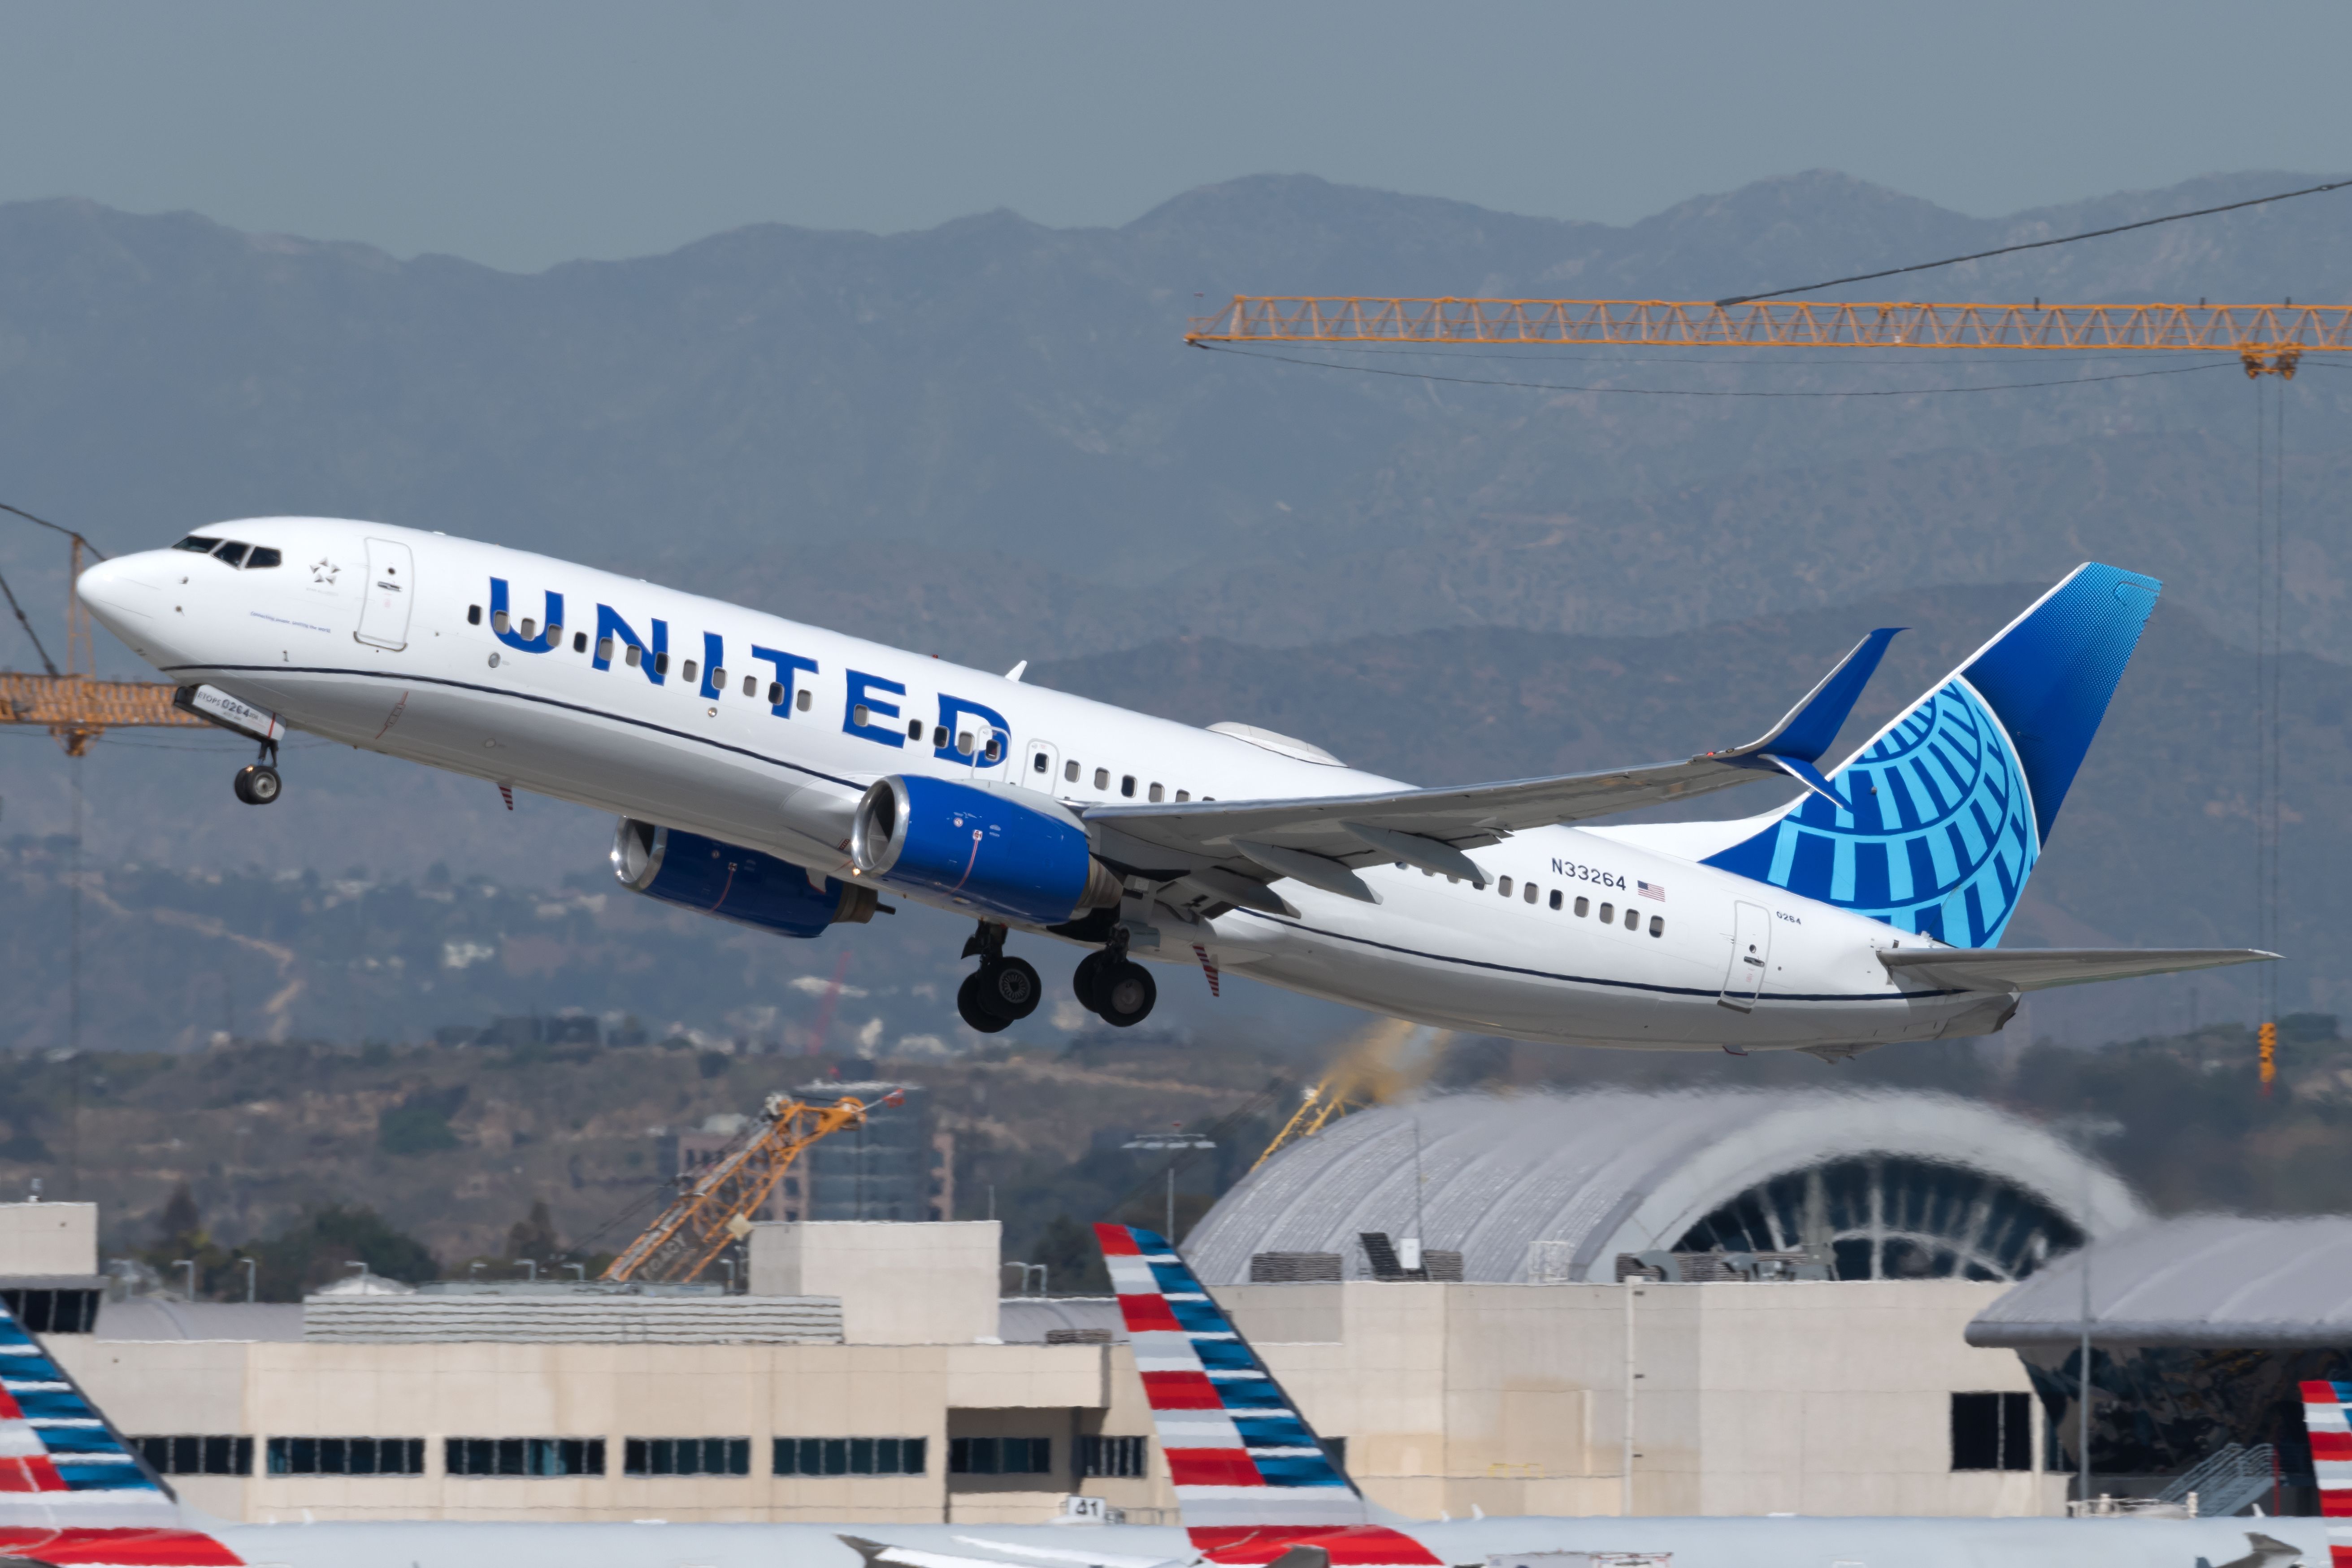 United Airlines Boeing 737-800 at Los Angeles International Airport